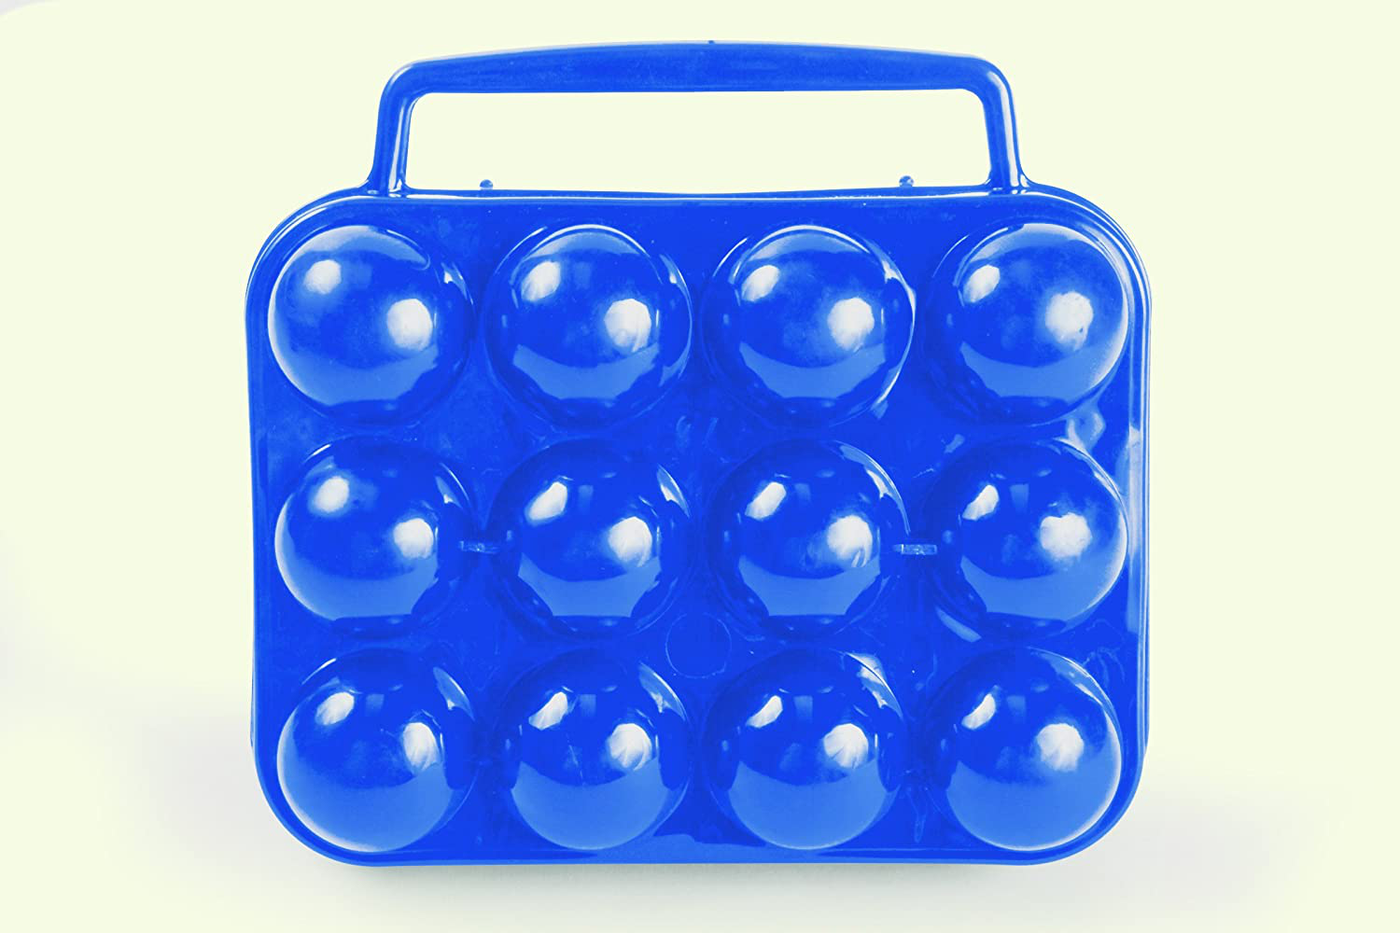 Camco Egg Carrier-Holder - Organize Eggs and Prevent Eggs from Cracking, Easily Fits into Your Refrigerator , Great for RV, Trailer and Camper Kitchens or Camping Holds A Dozen of Eggs (51015)